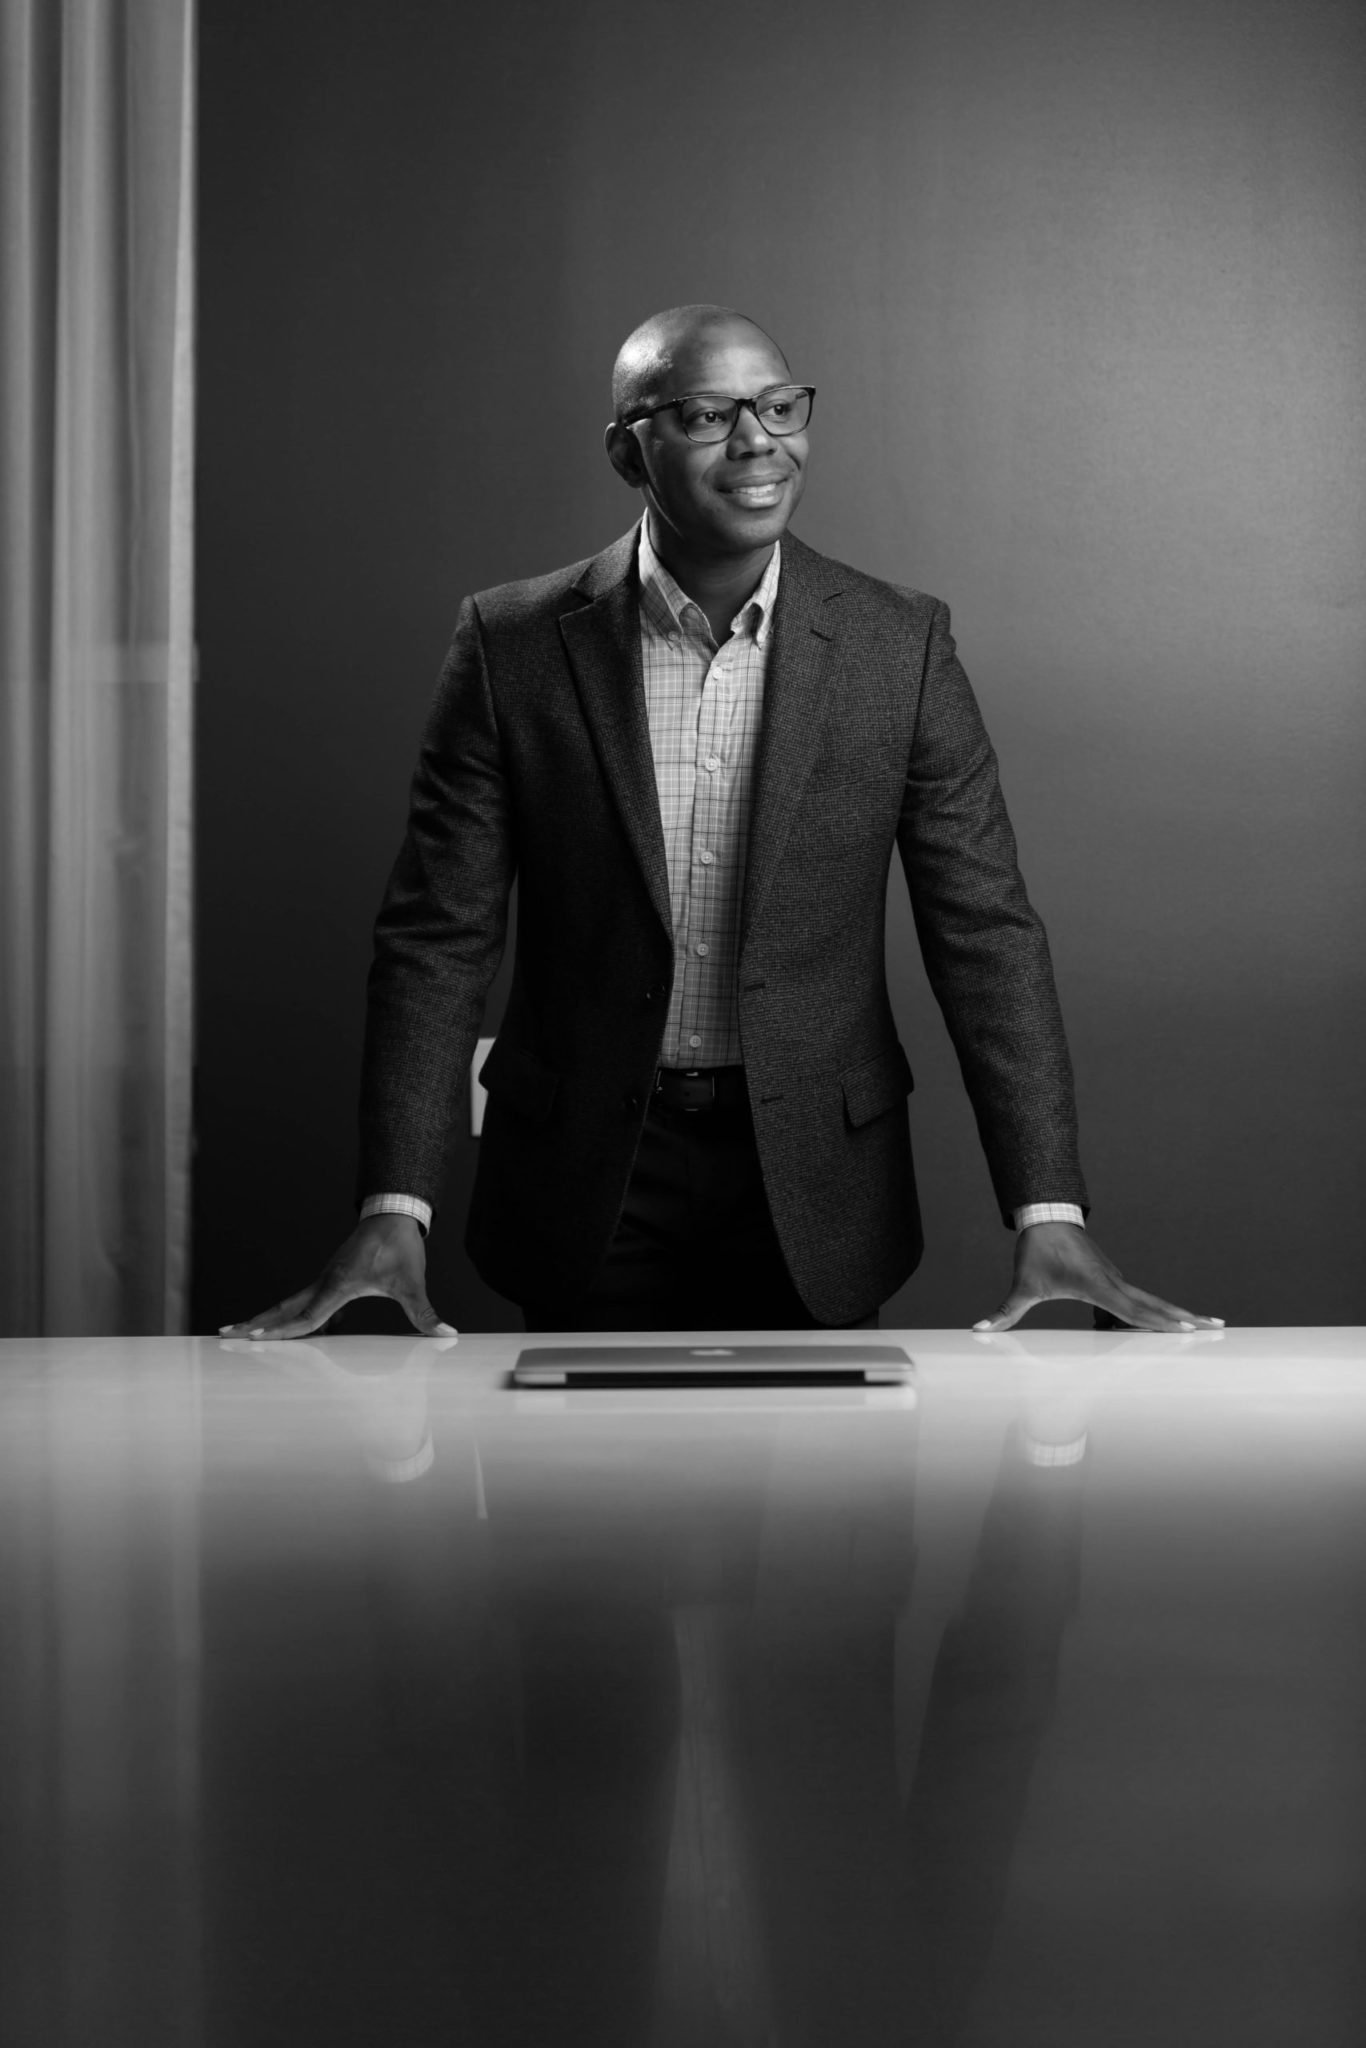 Marcell Haywood, founder and CEO of Encompass